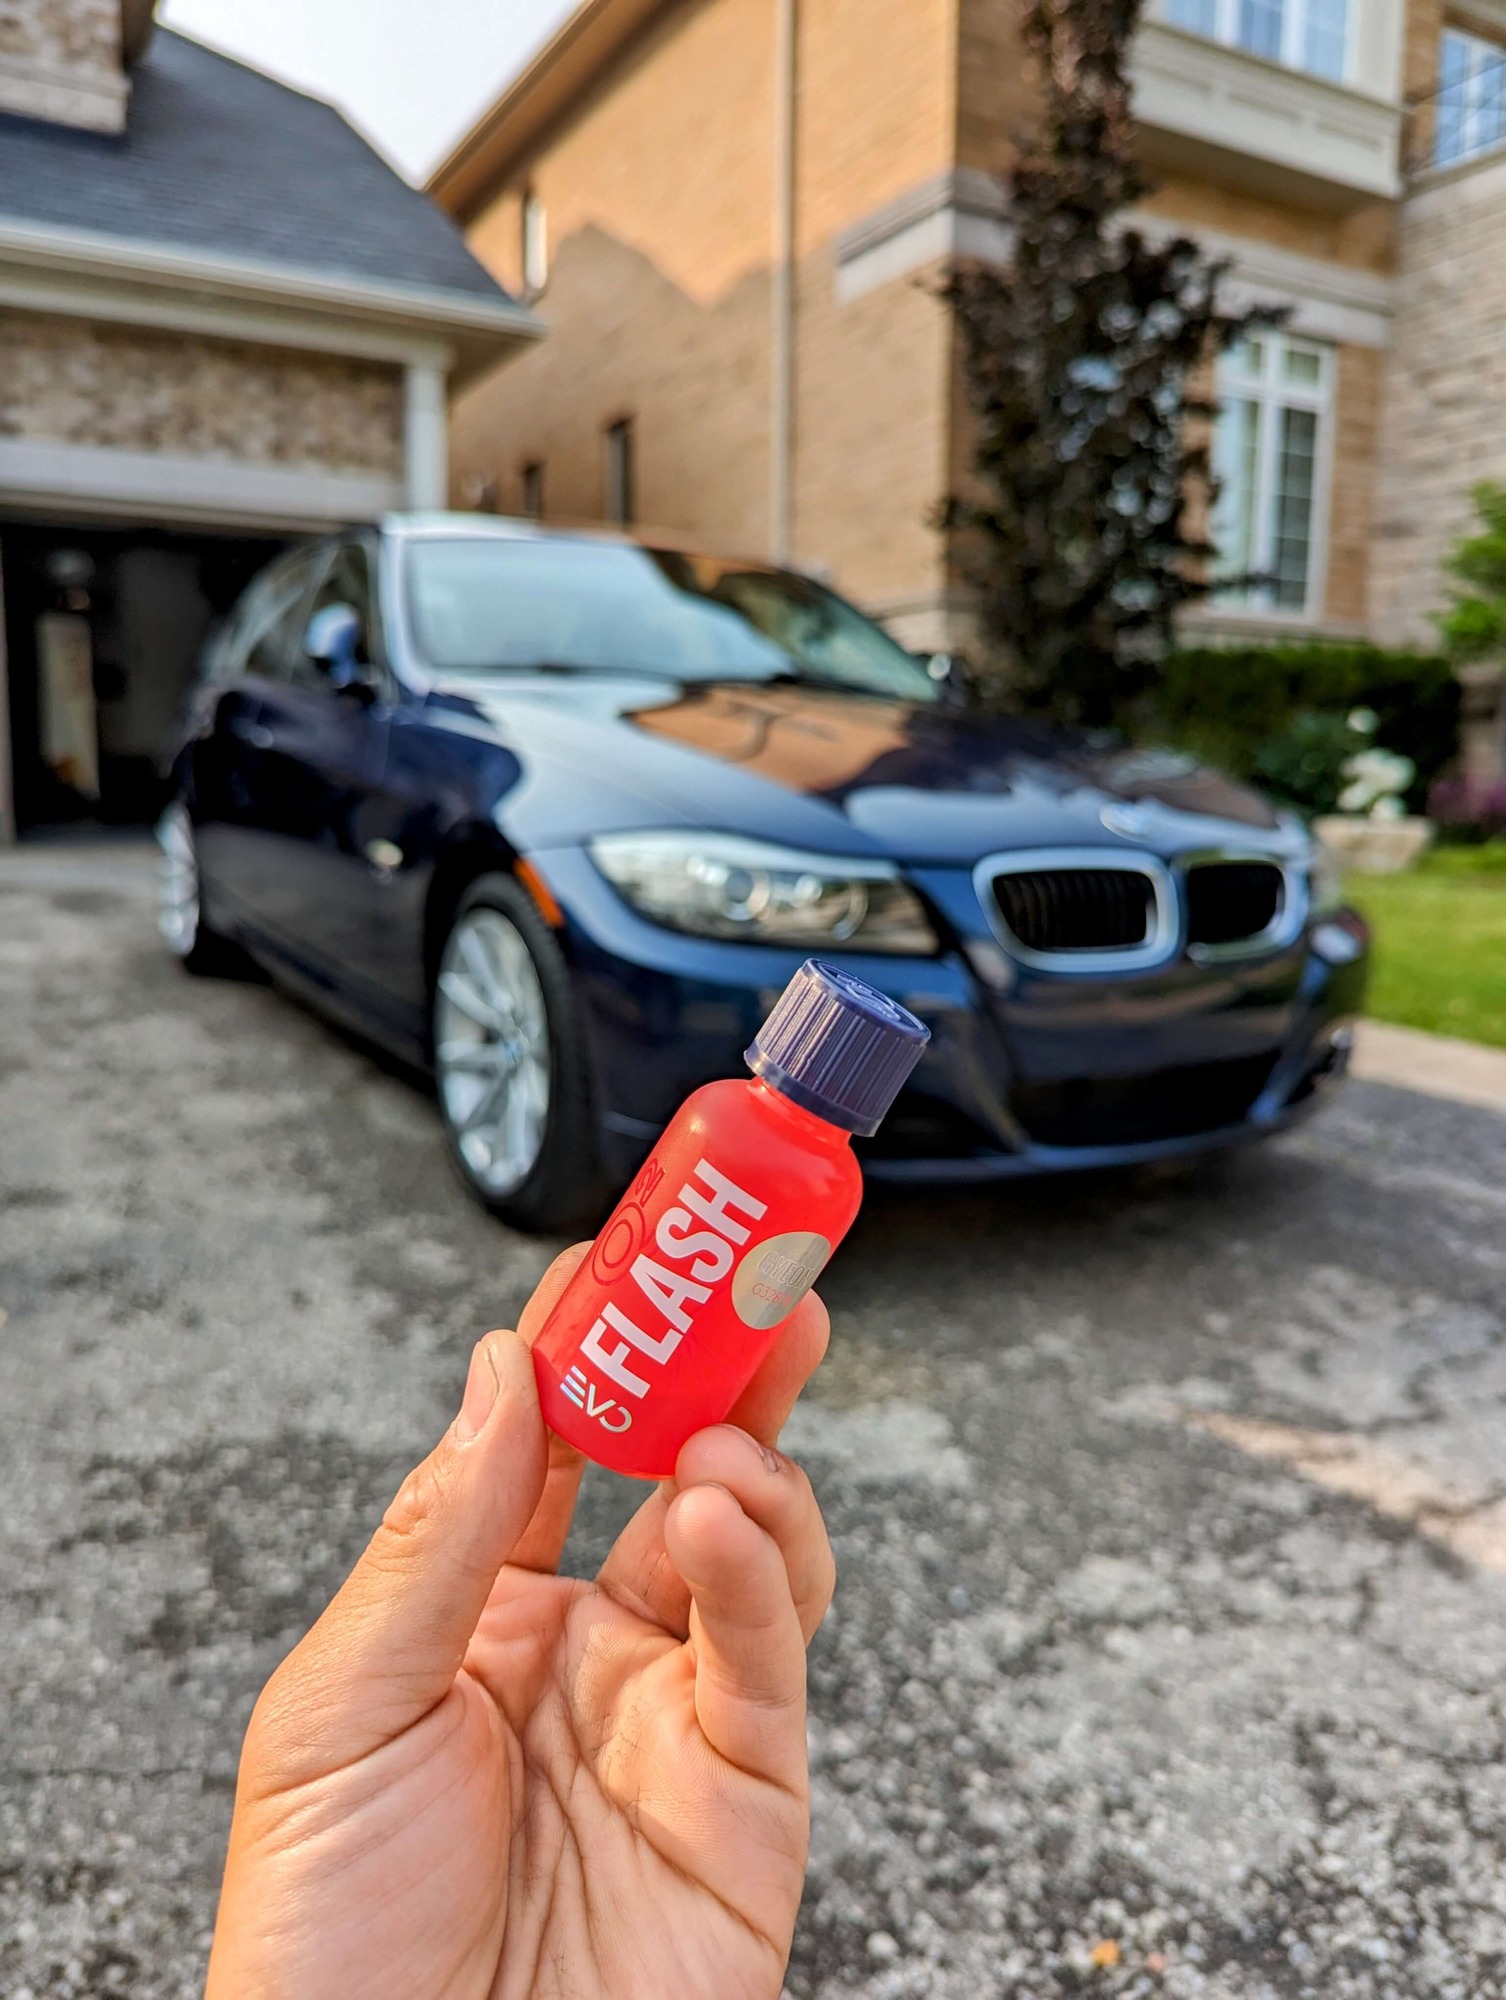 a hand holding a red bottle in front of a blue car